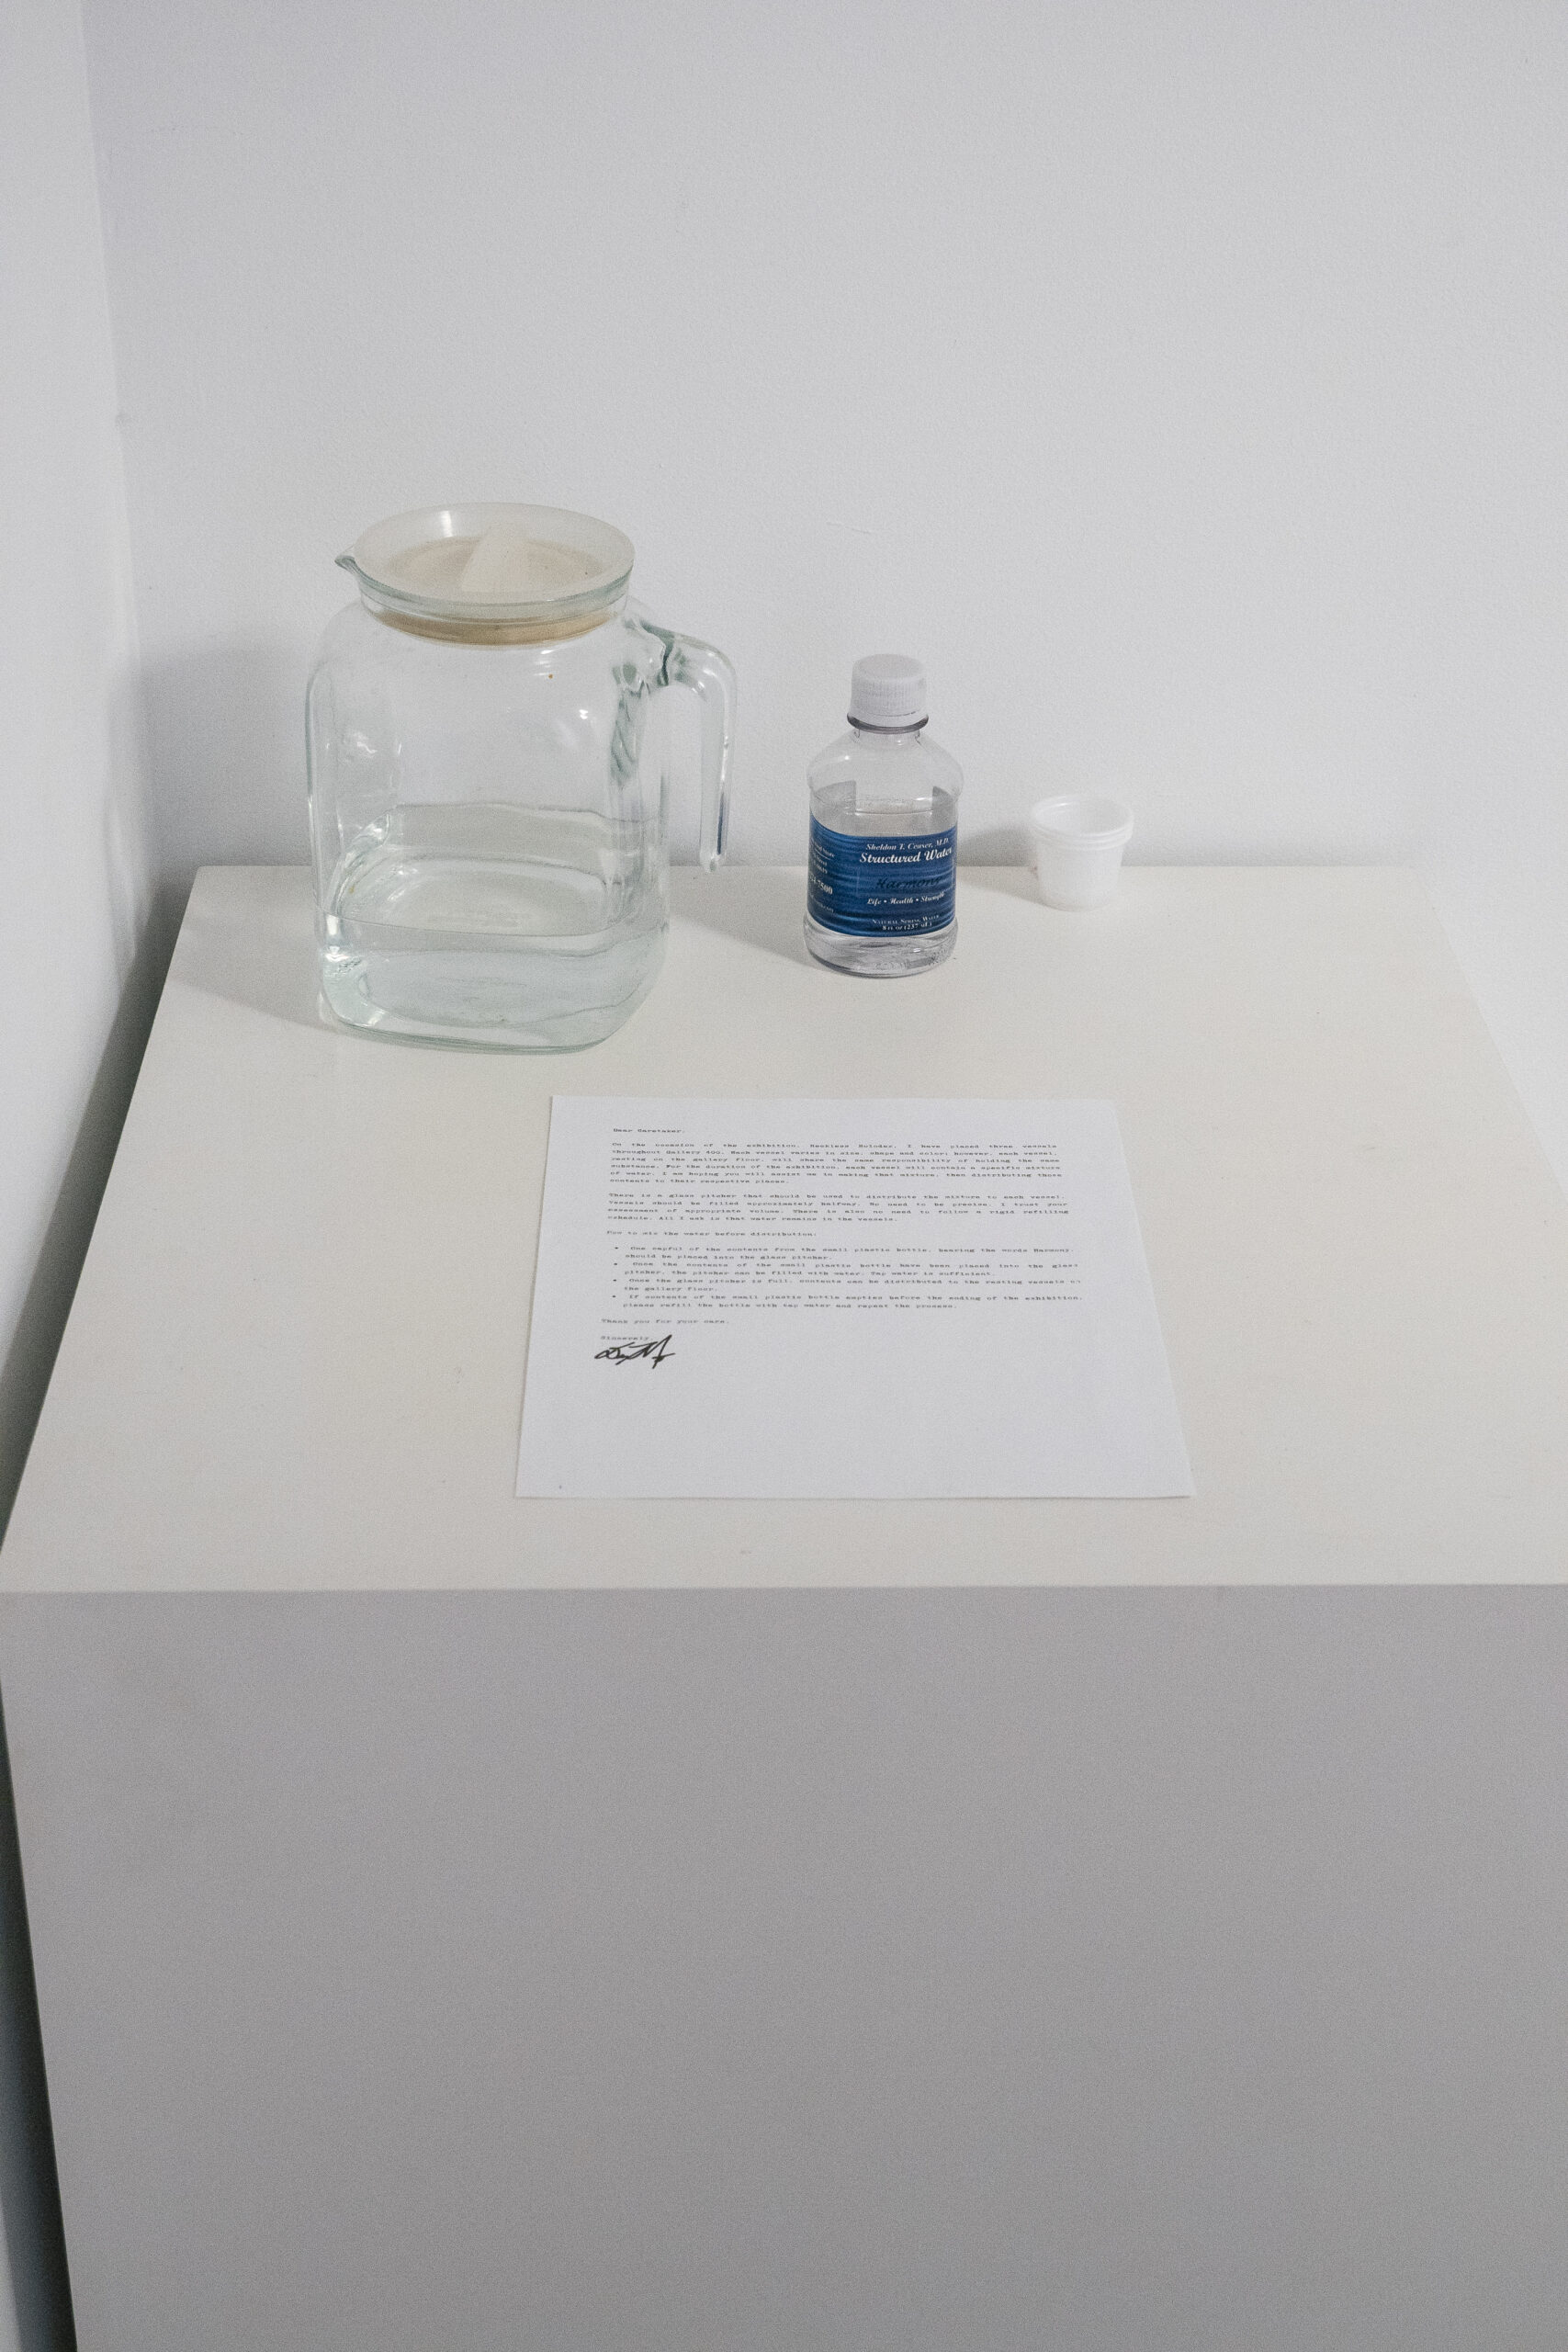 A glass vessel holds water, and sits next to a water bottle, which is half full. In front of these objects, a typed note sits.